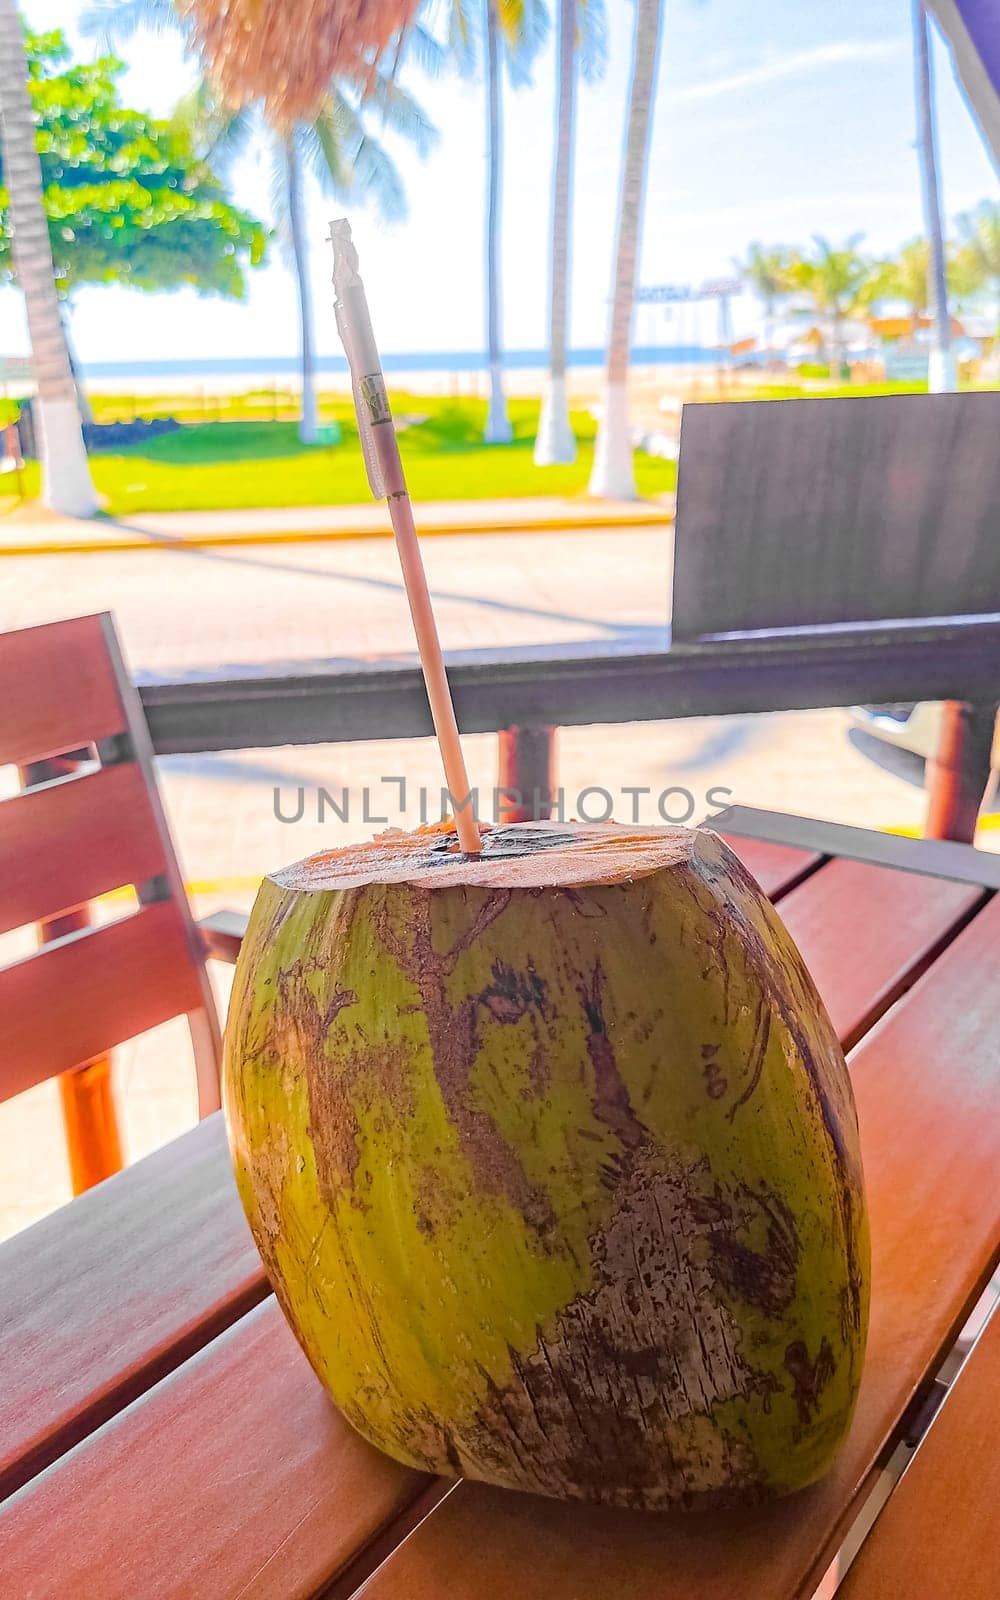 Tropical coconut with straw on the table in Zicatela Puerto Escondido Oaxaca Mexico.